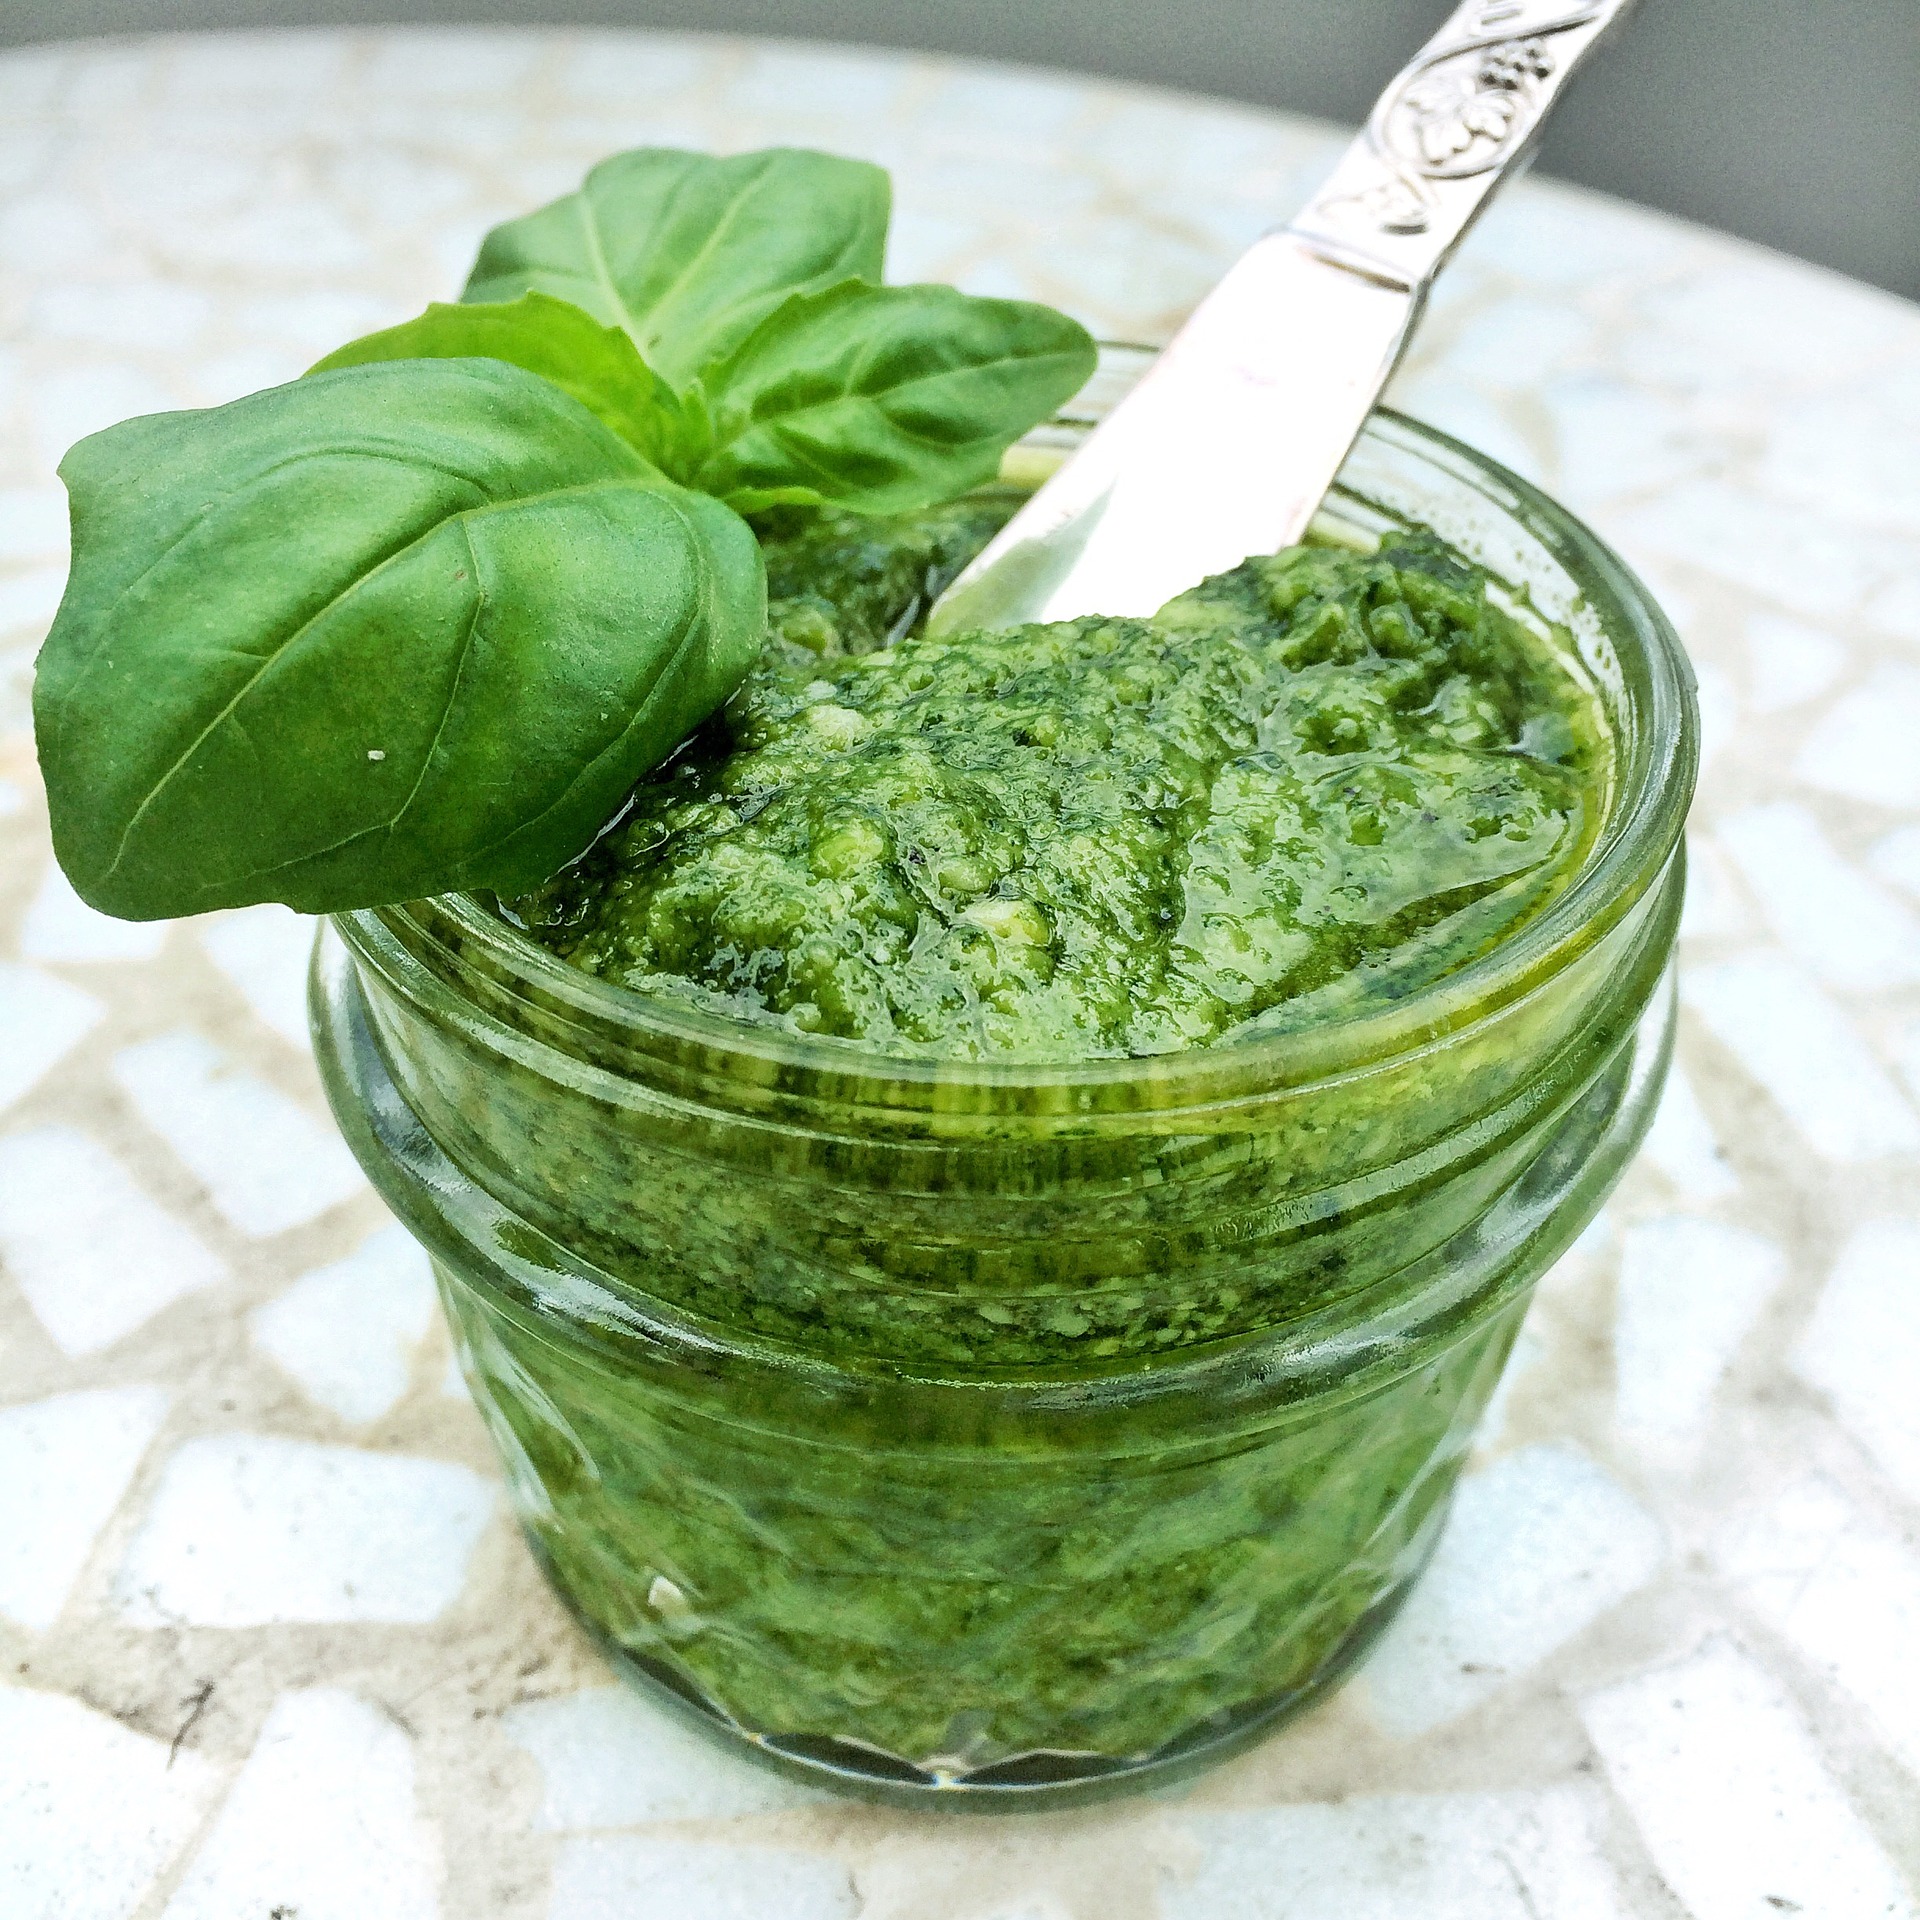 Herbs such as basil enhance the flavor of food without adding sodium. (Pixabay photo)